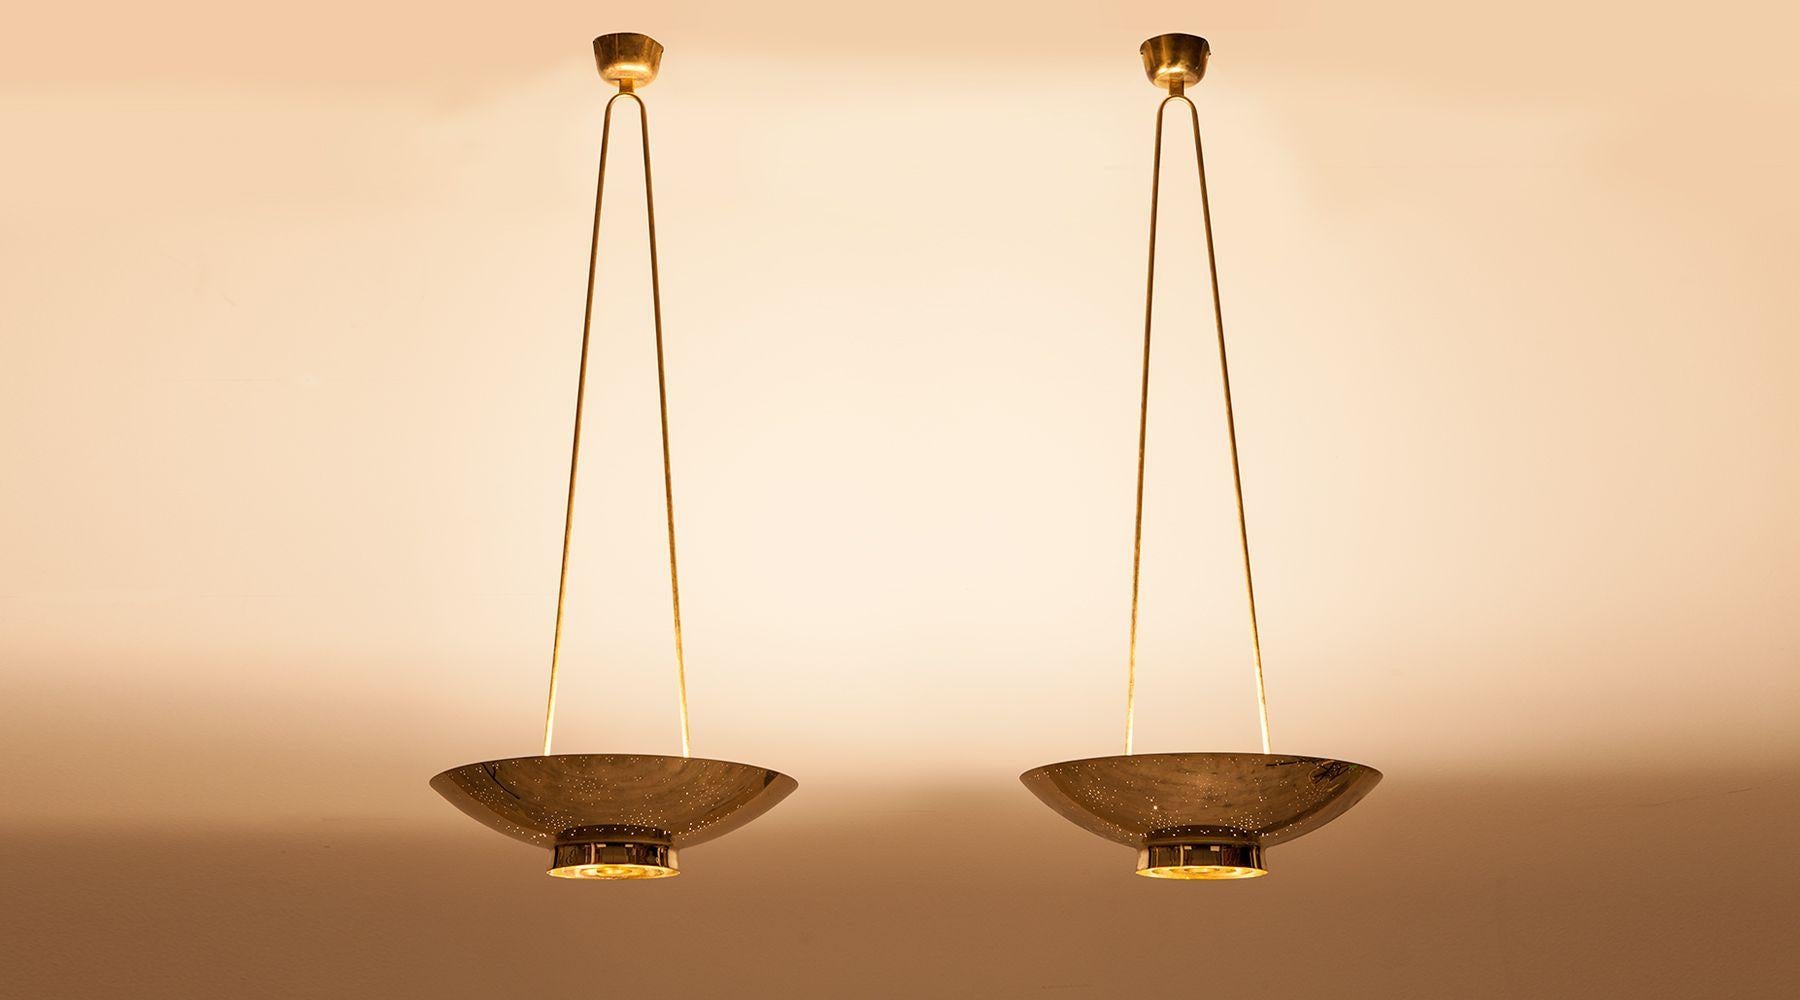 This very elegant pair of ceiling lamps are made of highest quality by famous Finish Paavo Tynell. The solid perforated brass pendant with etched glass downlight lives trough its simple, understated pure form. 
Manufactured by Taito Oy. 

Paavo